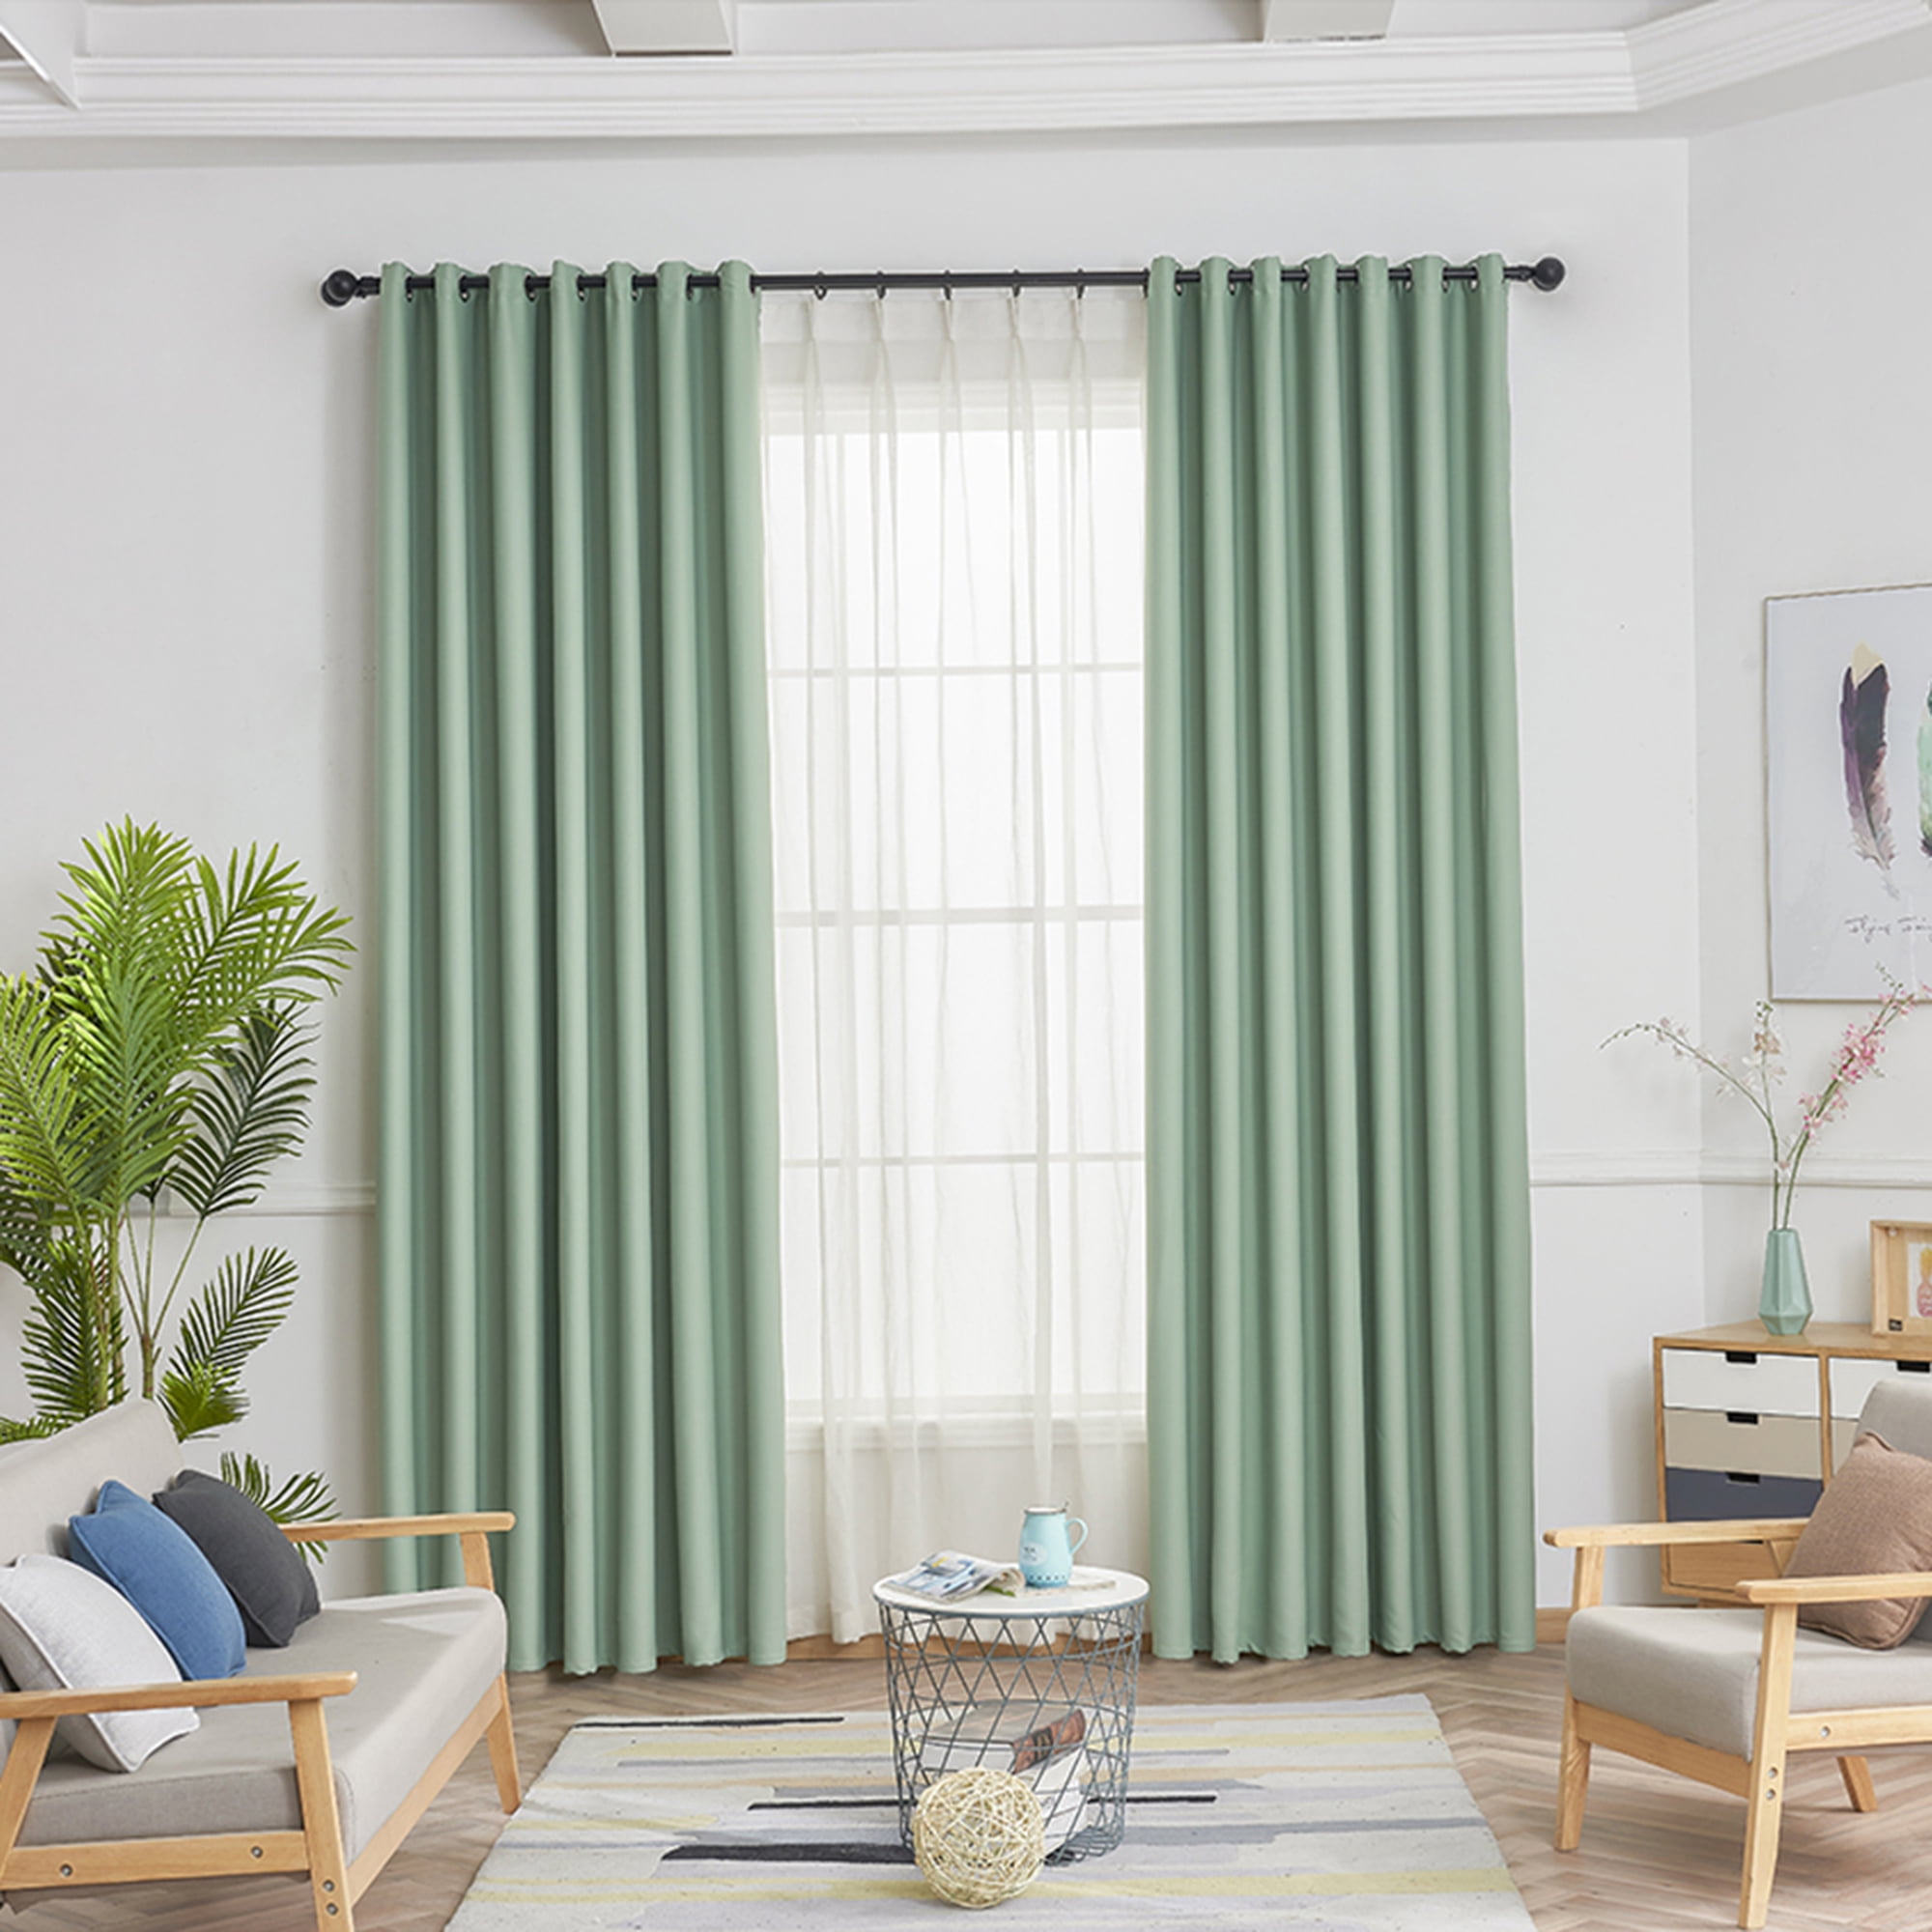 THERMAL BLACKOUT CURTAINS EYELET RING TOP LIVING ROOM BEDROOM HOME DECOR ENERGY EFFICIENT BLACKOUT CURTAIN PANEL Walmartcom Walmartcom